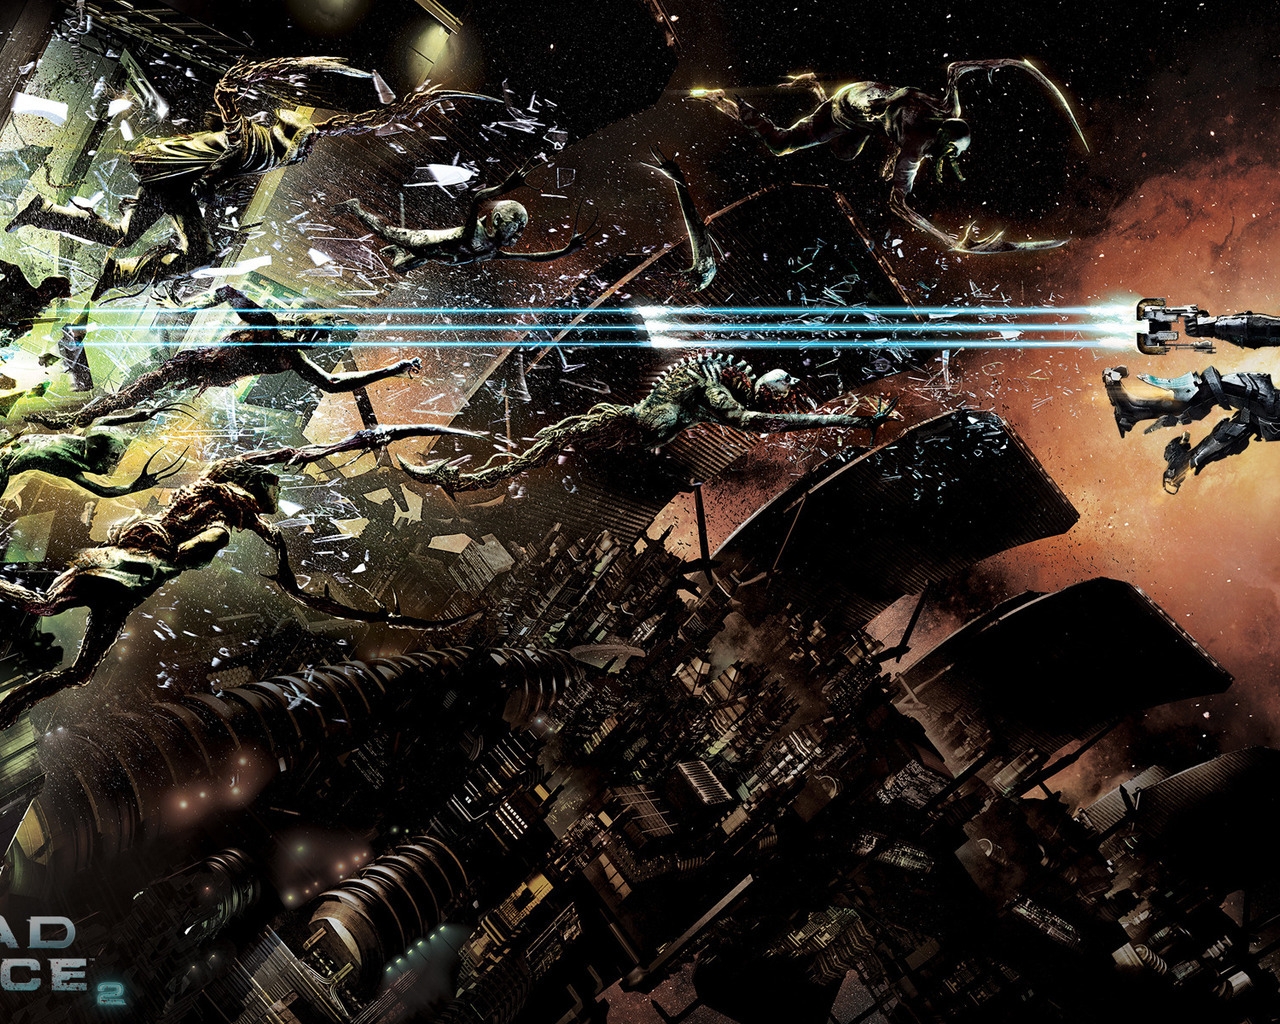 Dead Space 2 for 1280 x 1024 resolution